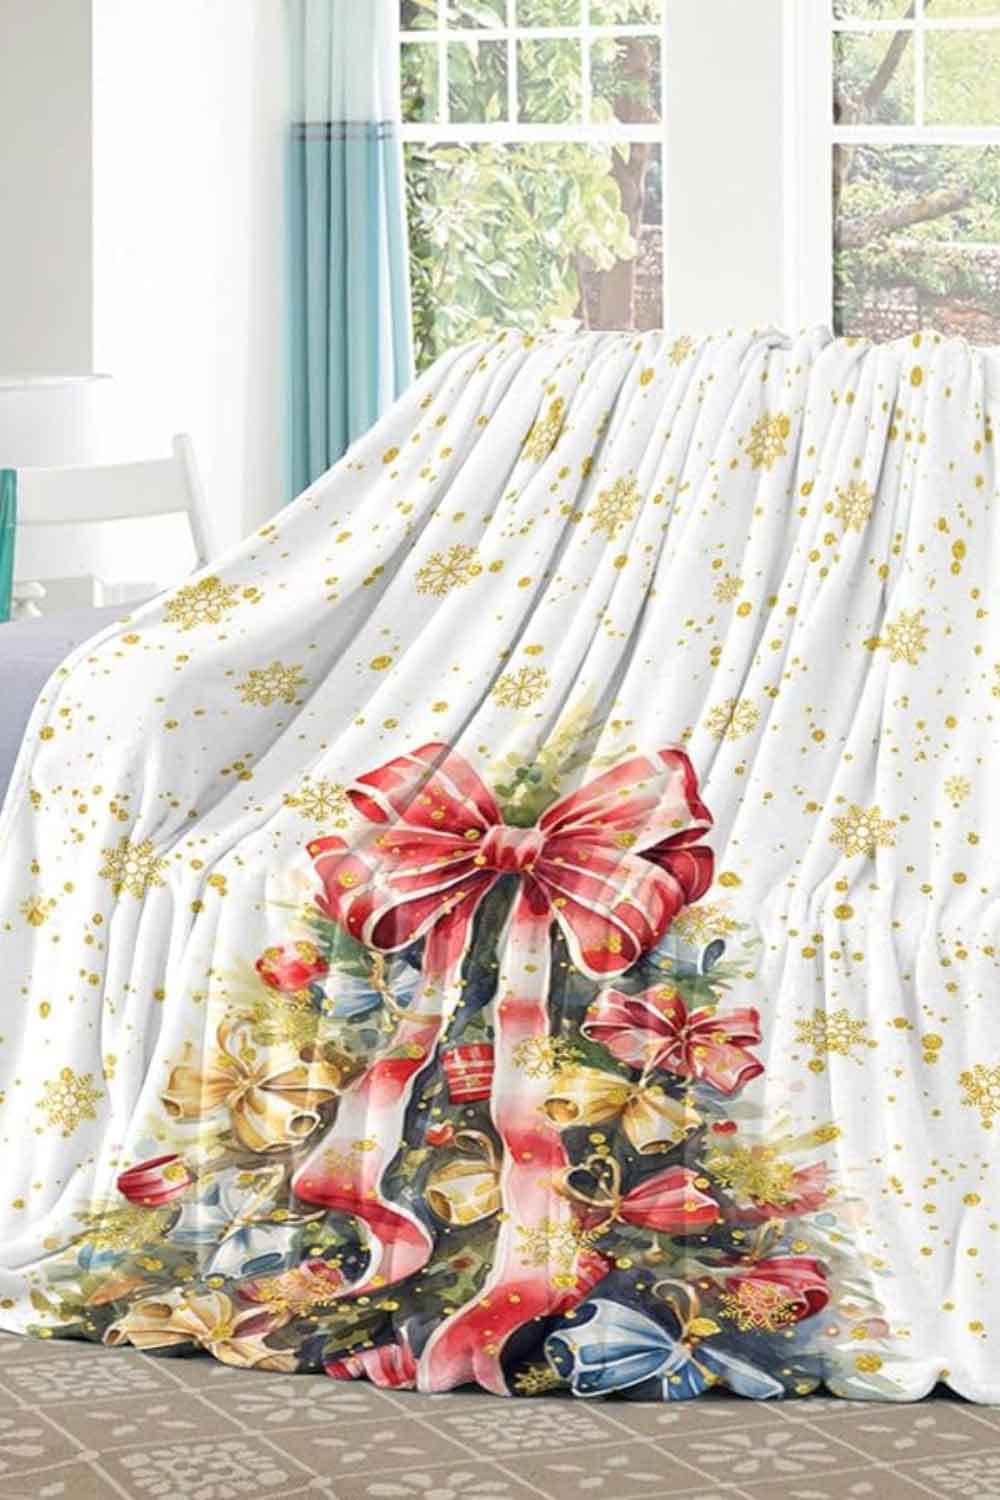 Use Cozy Blankets as Tablecloths